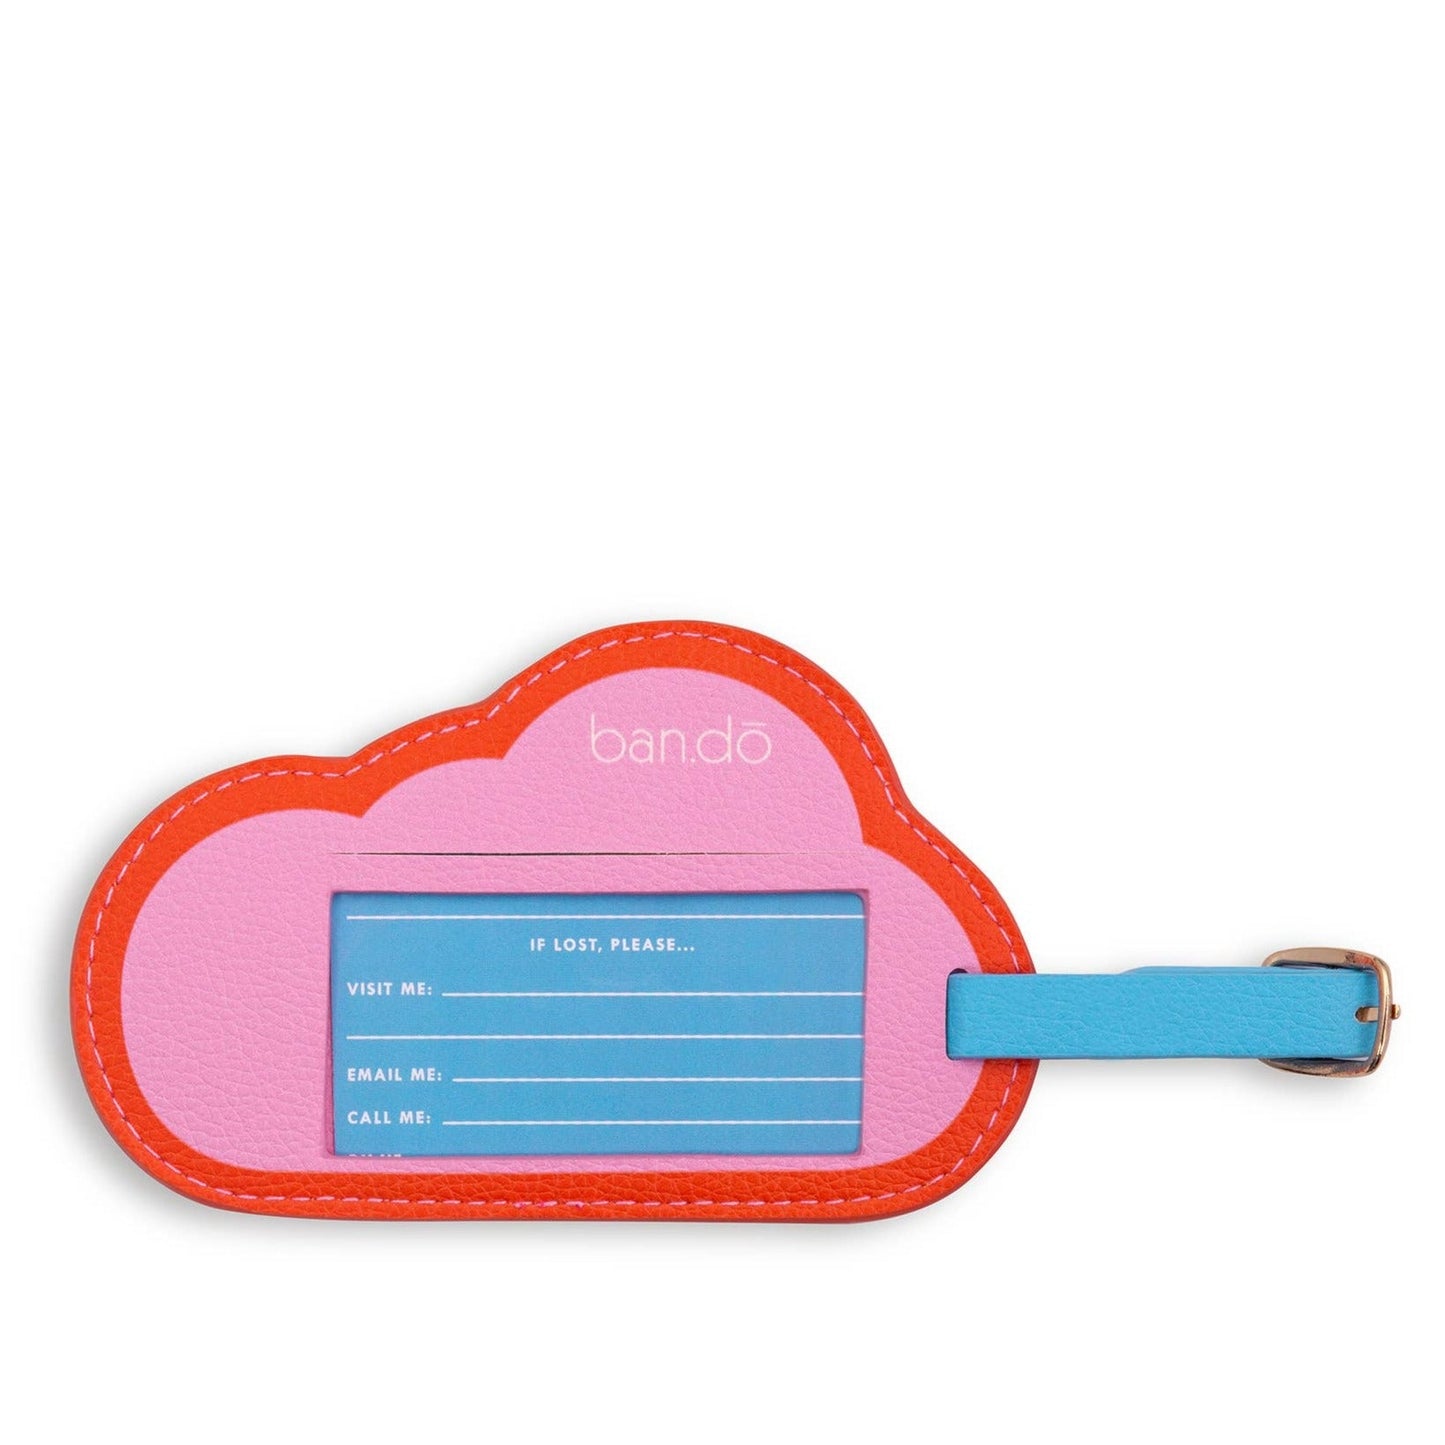 Head in the Clouds Getaway Shaped Luggage Tag | Cute Leatherette Luggage Identifier